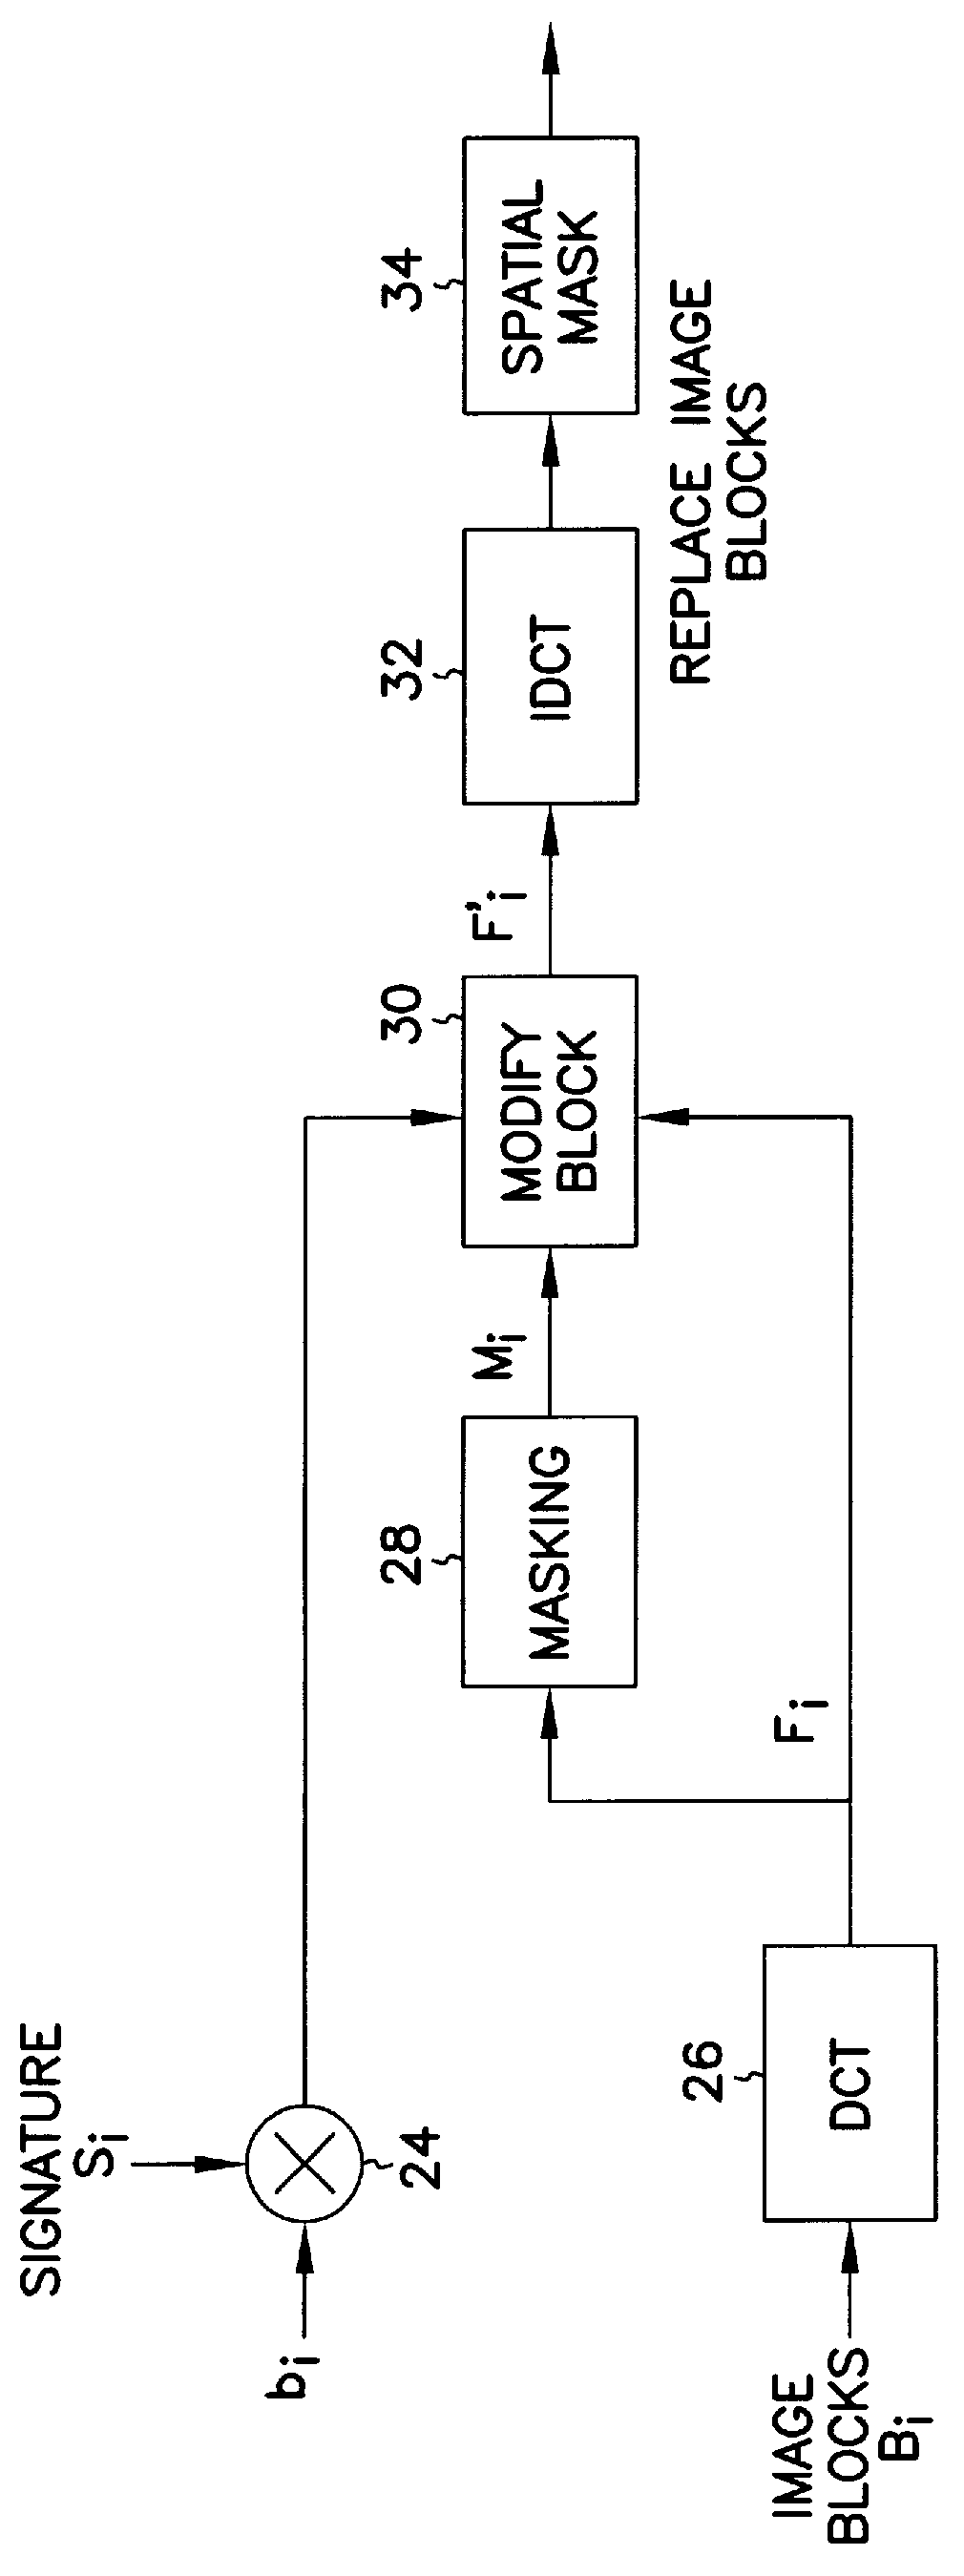 Method and apparatus for embedding data, including watermarks, in human perceptible images